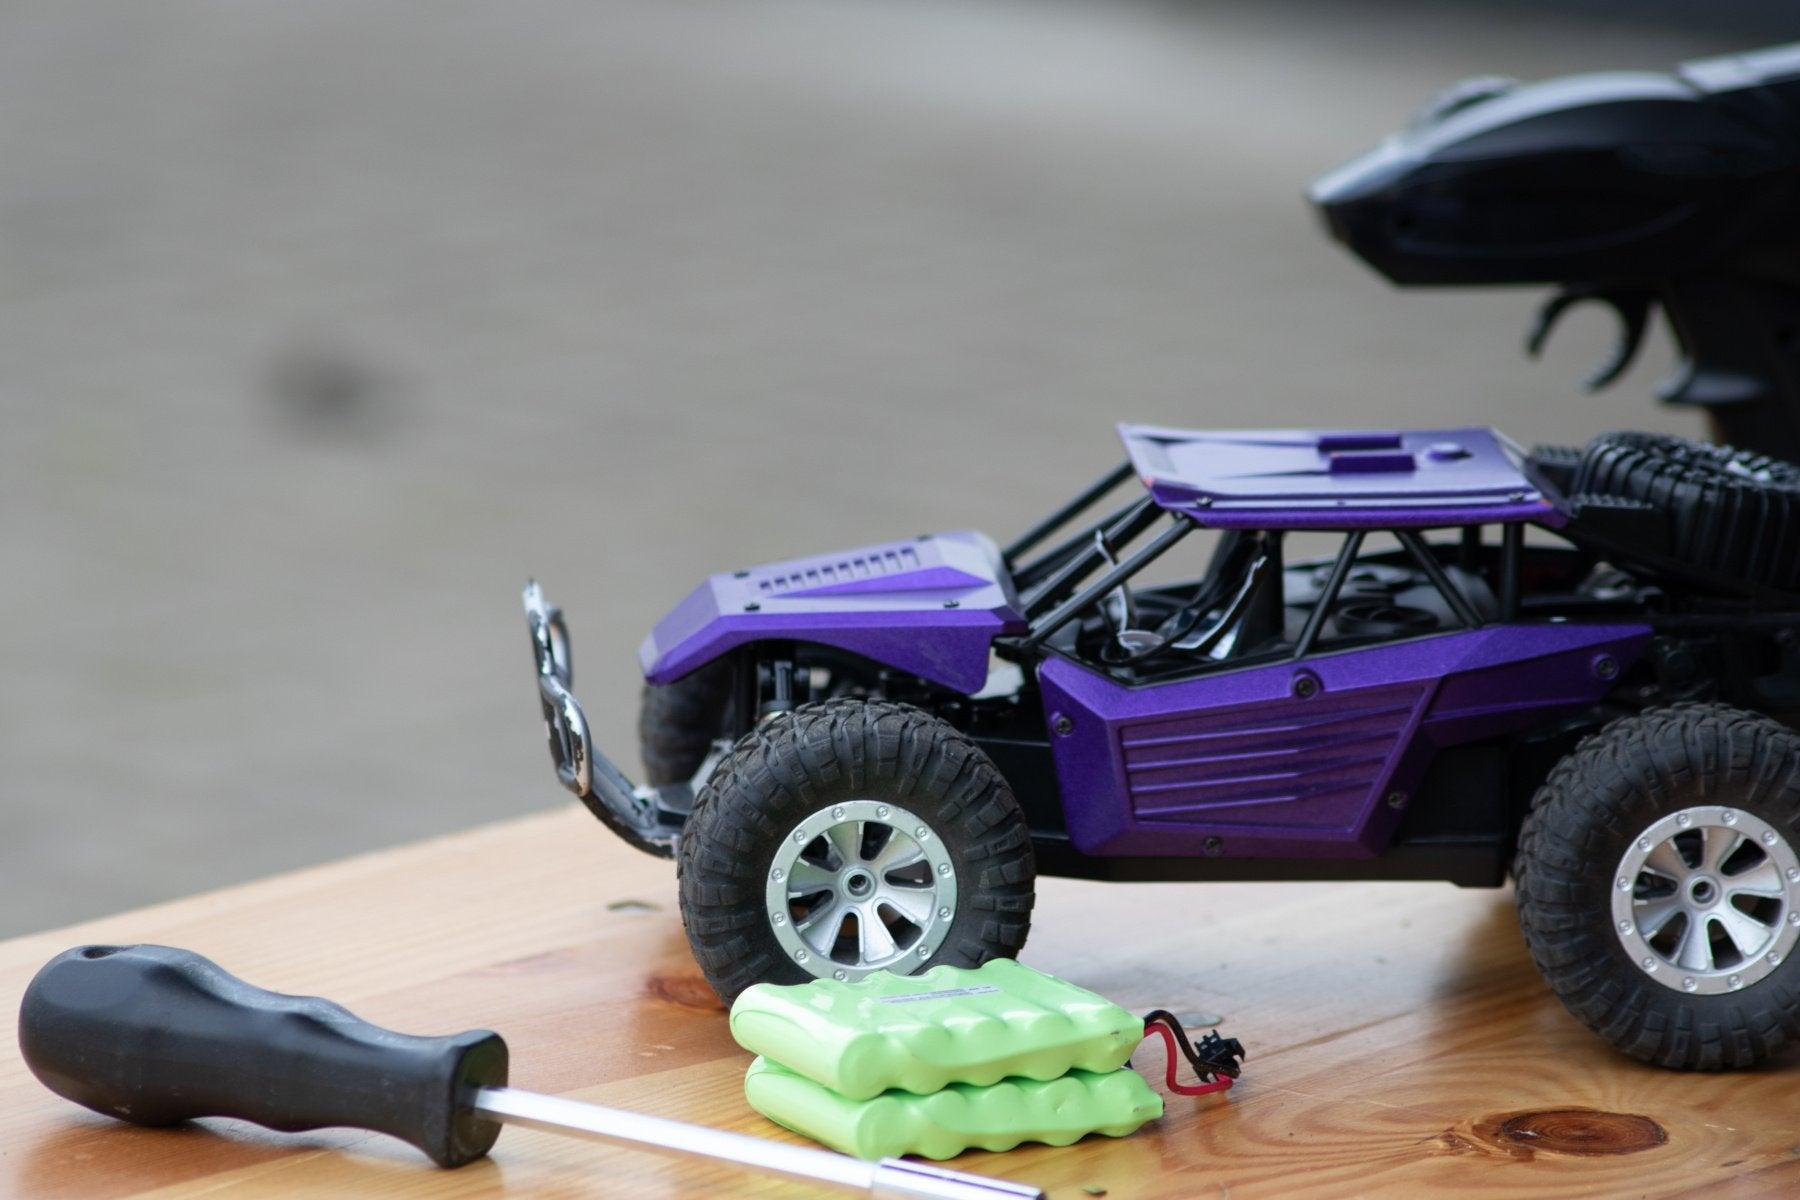 Best Battery Powered Rc Truck: Choosing the perfect battery-powered RC truck: Factors to consider and a comparison of the top models.